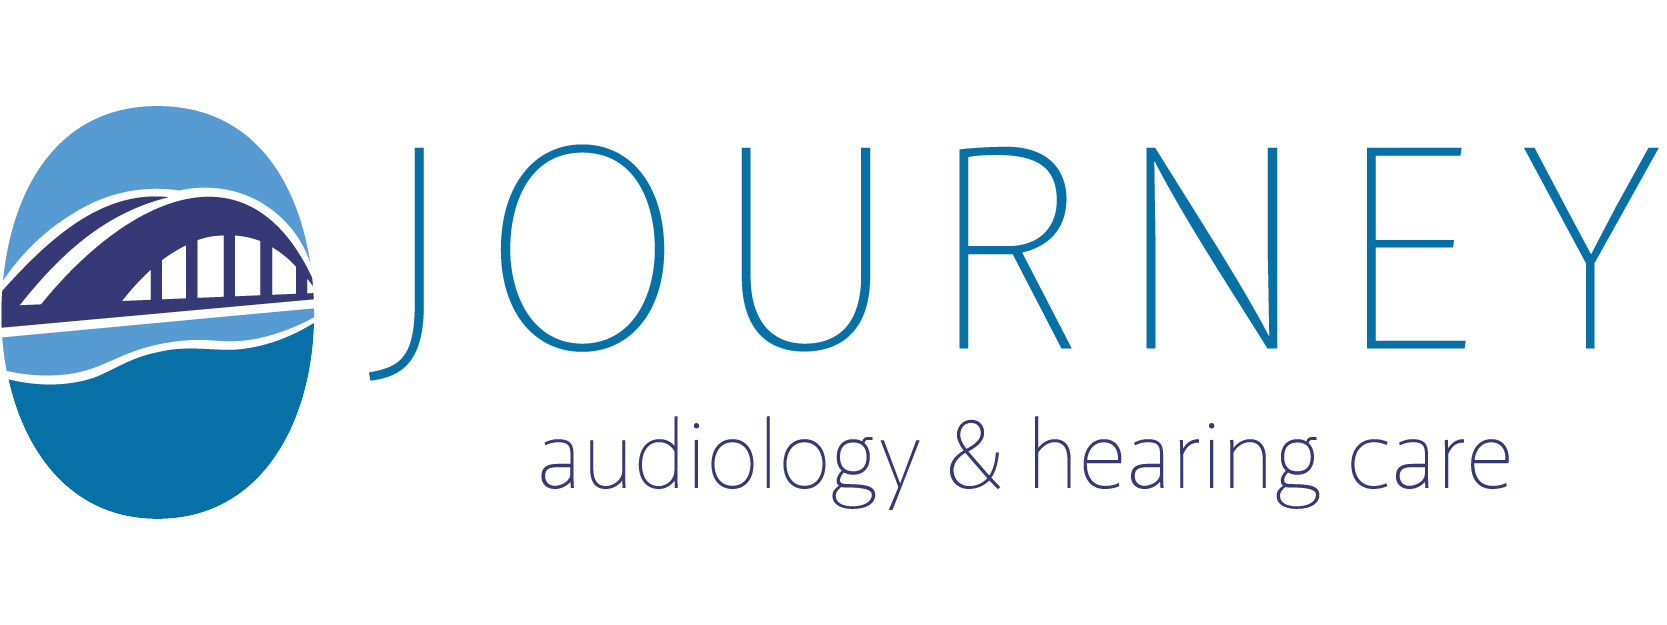 Journey Audiology and Hearing Care